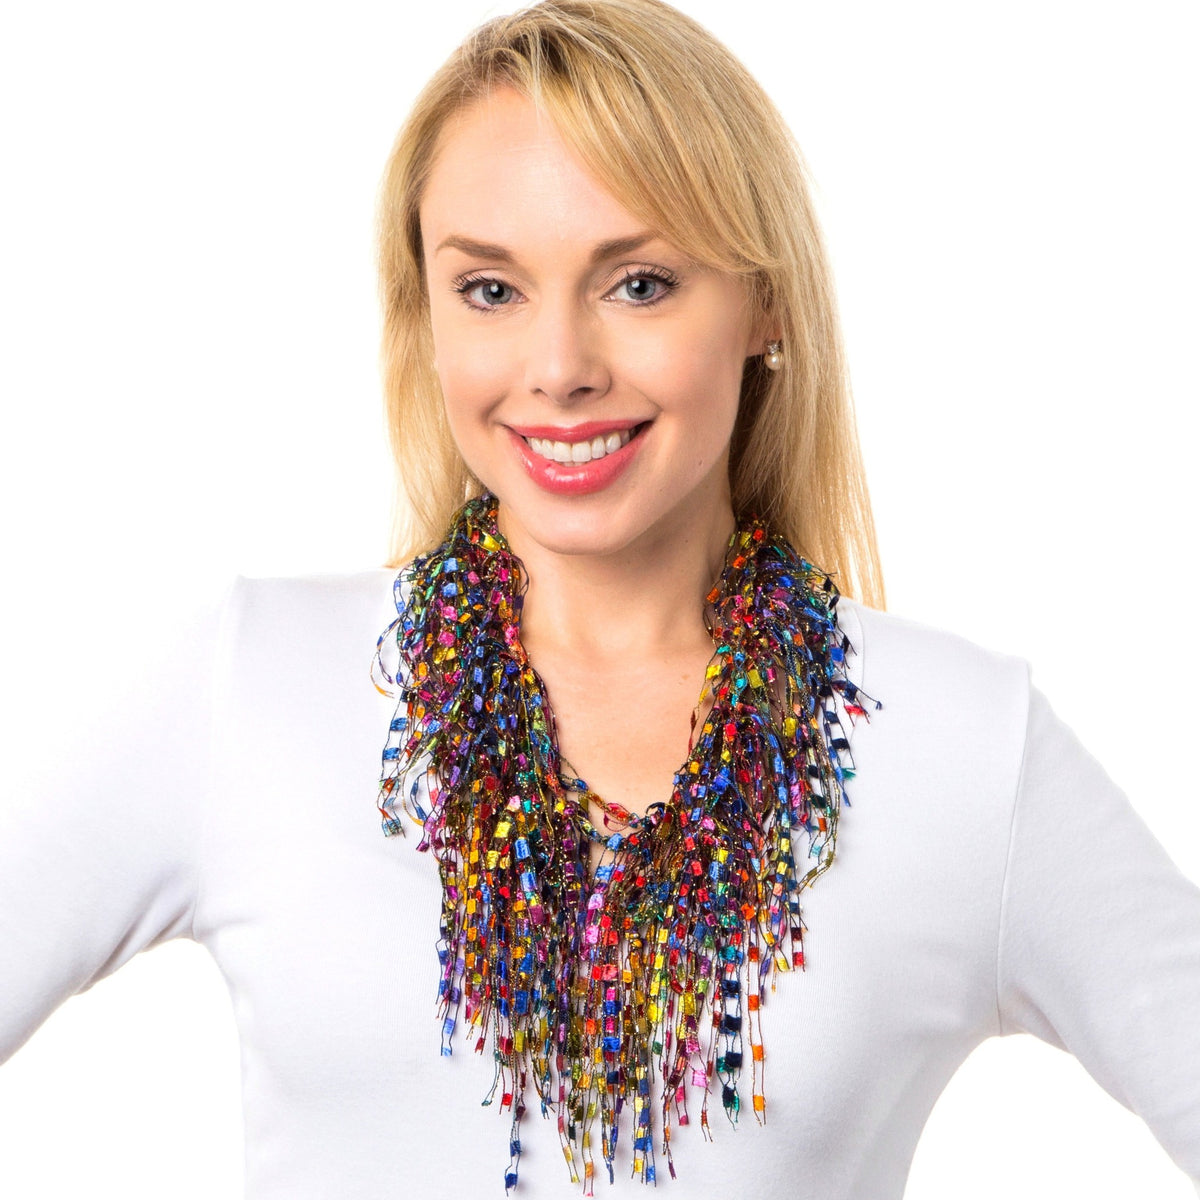 BIB Necklace worn on model showing lightweight and bold colors